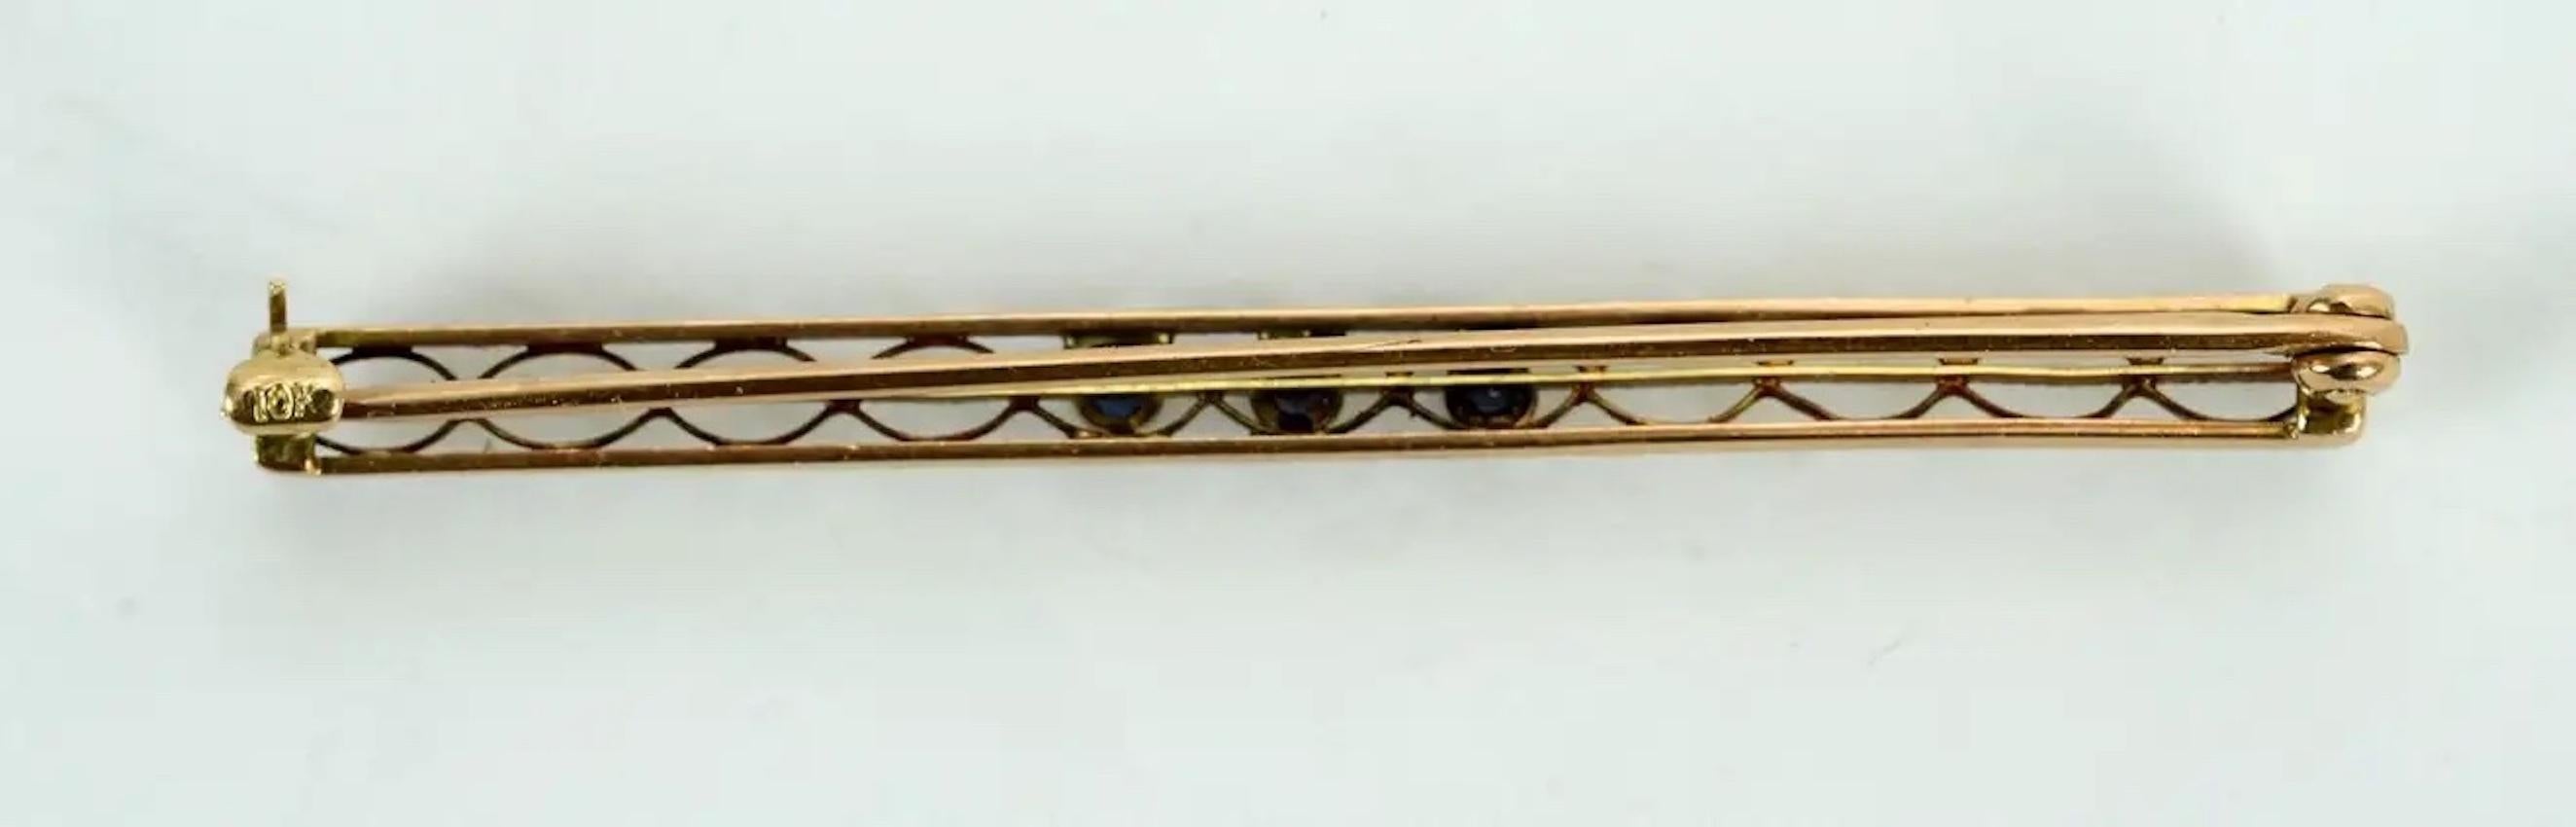 Vintage 10 Karat Yellow Gold, Diamond and Seed Pearl Bar Pin or Brooch. Early 20th c with a central 2.5mm full cut diamond set in a floral mount and a pair of 2mm seed pearls in a beautifully detailed, pierced and decorated frame, hallmarked 10K.